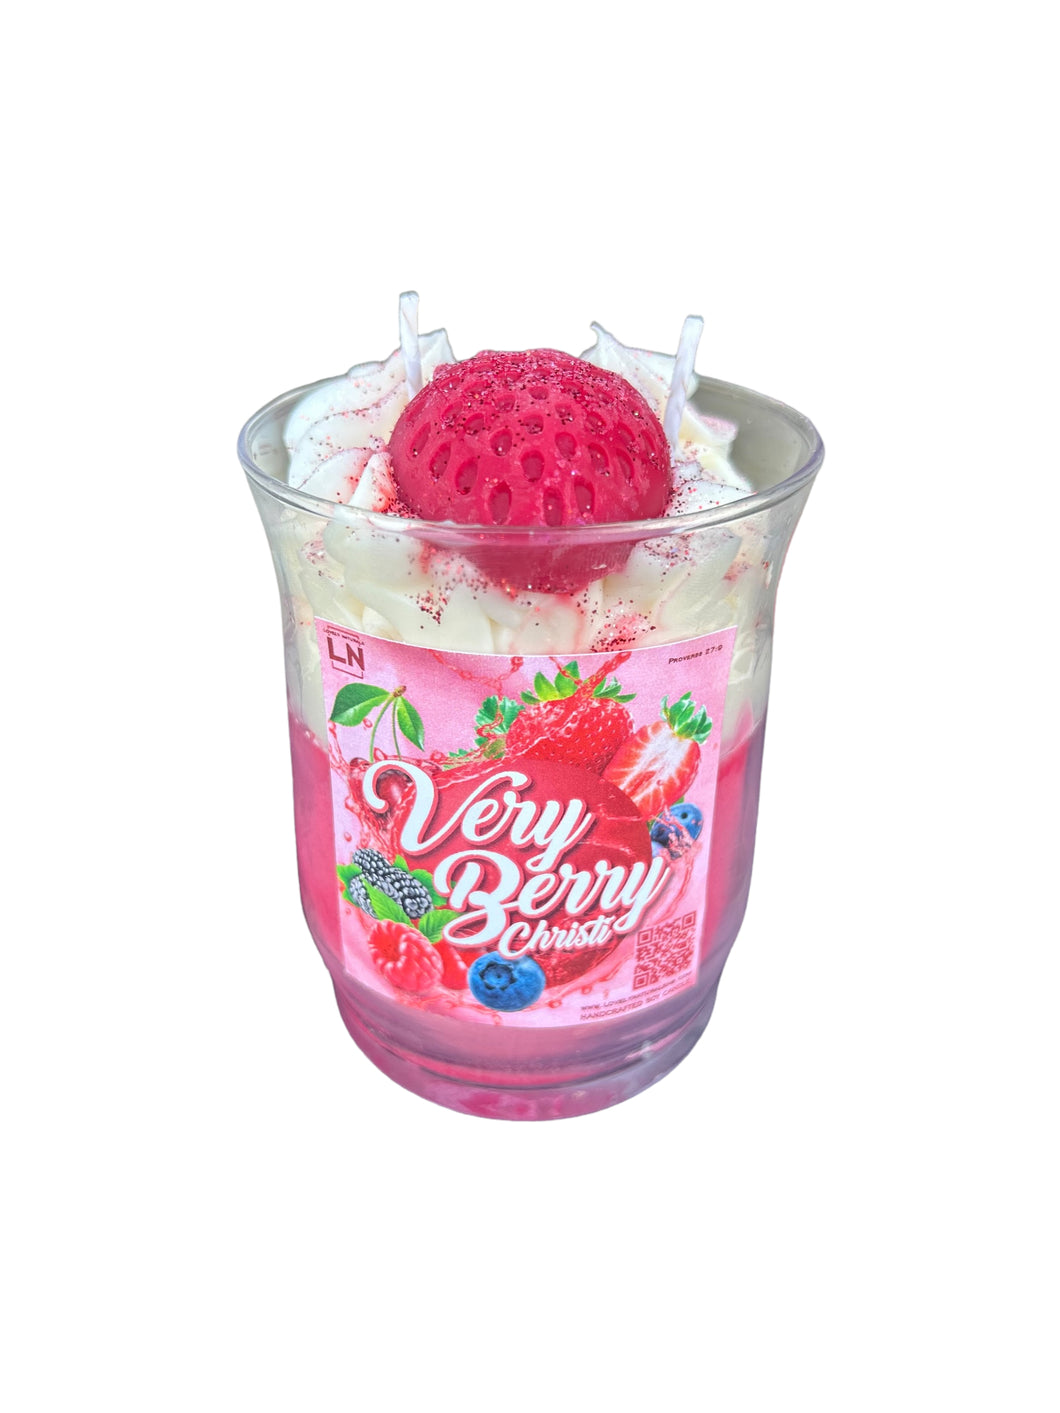 Very Berry Christi Soy Candle